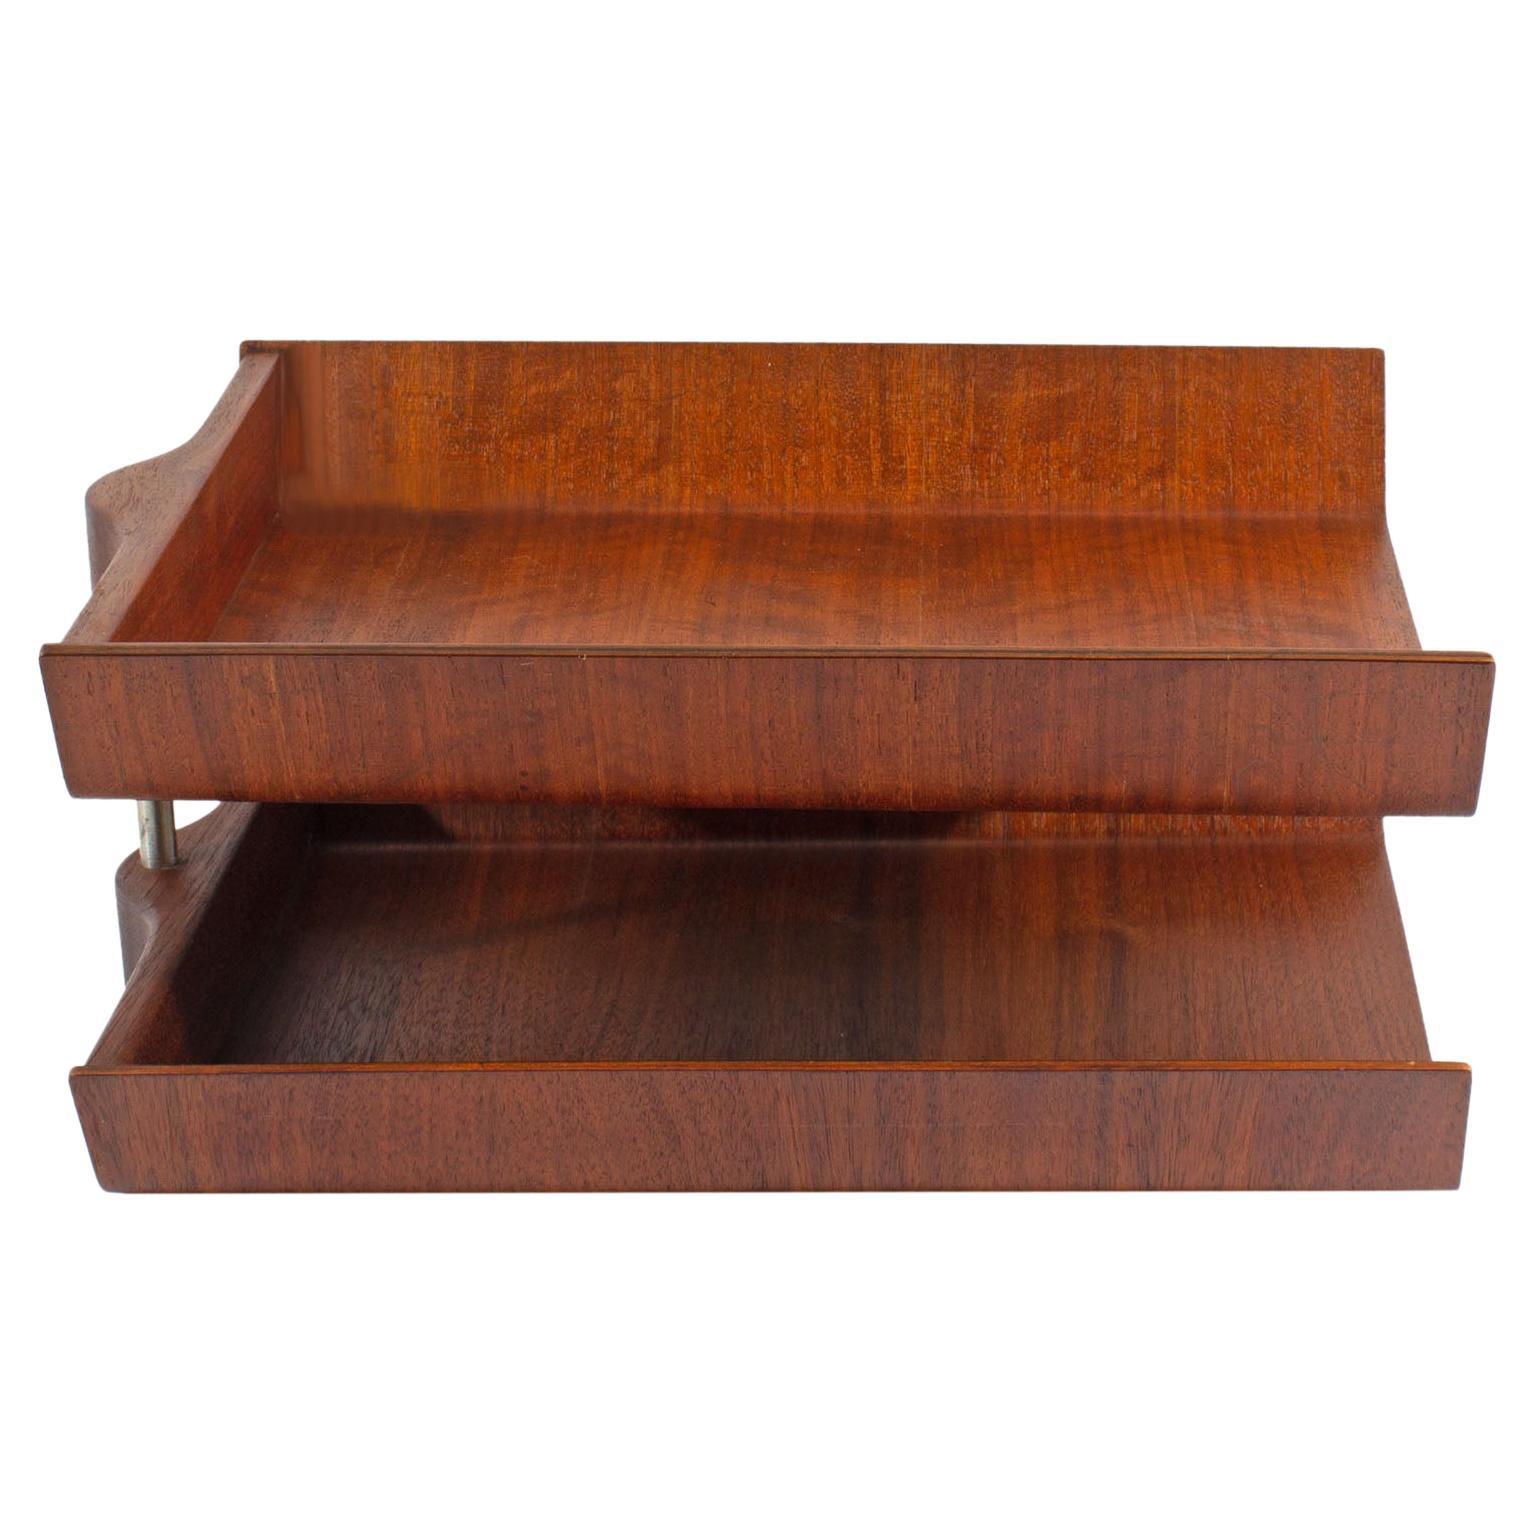 A molded plywood pivoting letter tray designed by American designer Florence Knoll (1917-2019) for Knoll International. Made between 1961-1970, two molded trays are adjoined by a metal dowel rod that allows the top tray to pivot. This iconic desk